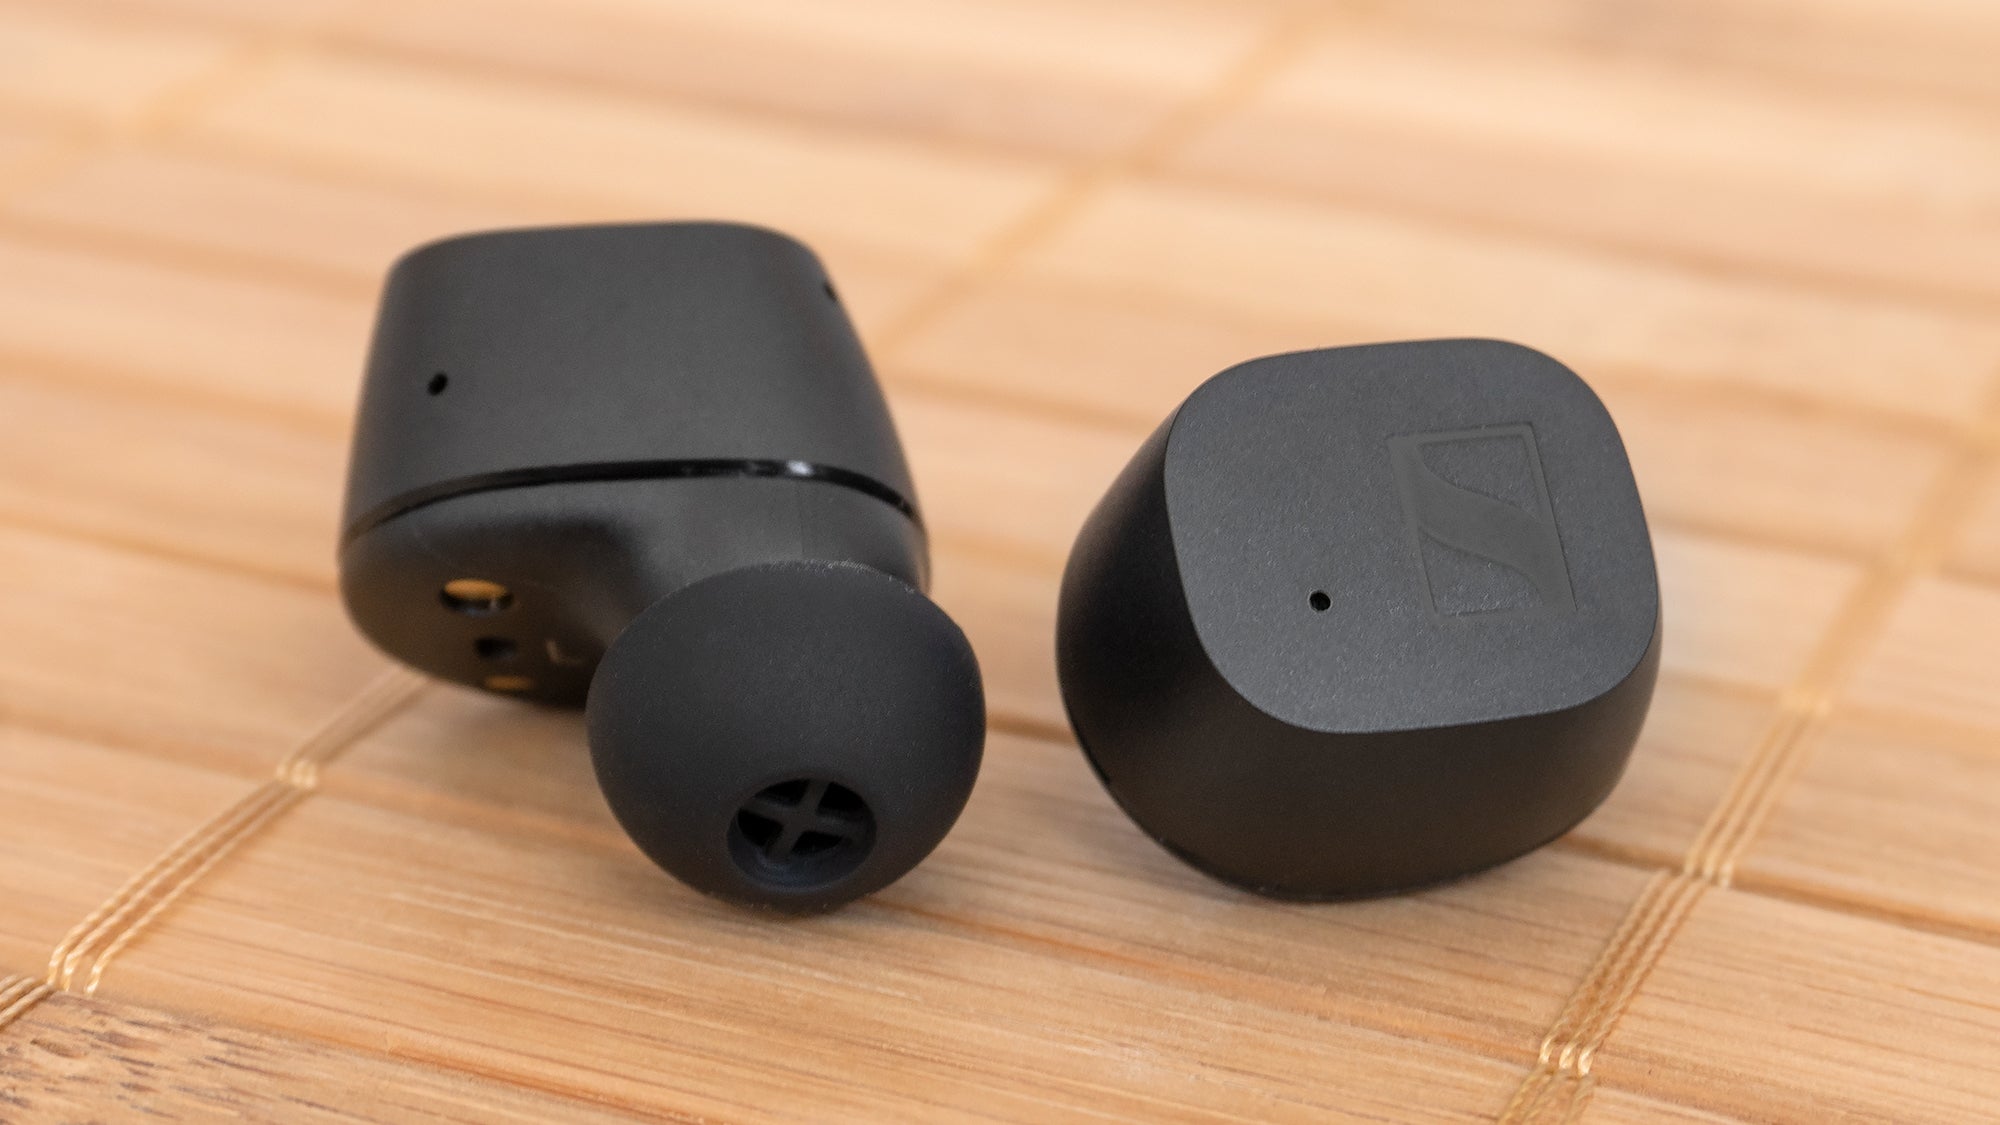 The tap controls on the CX True Wireless are very sensitive and easy to trigger without dislodging the buds, but they can also be completely disabled using the accompanying app so you'll never accidentally trigger an unwanted function. (Photo: Andrew Liszewski/Gizmodo)